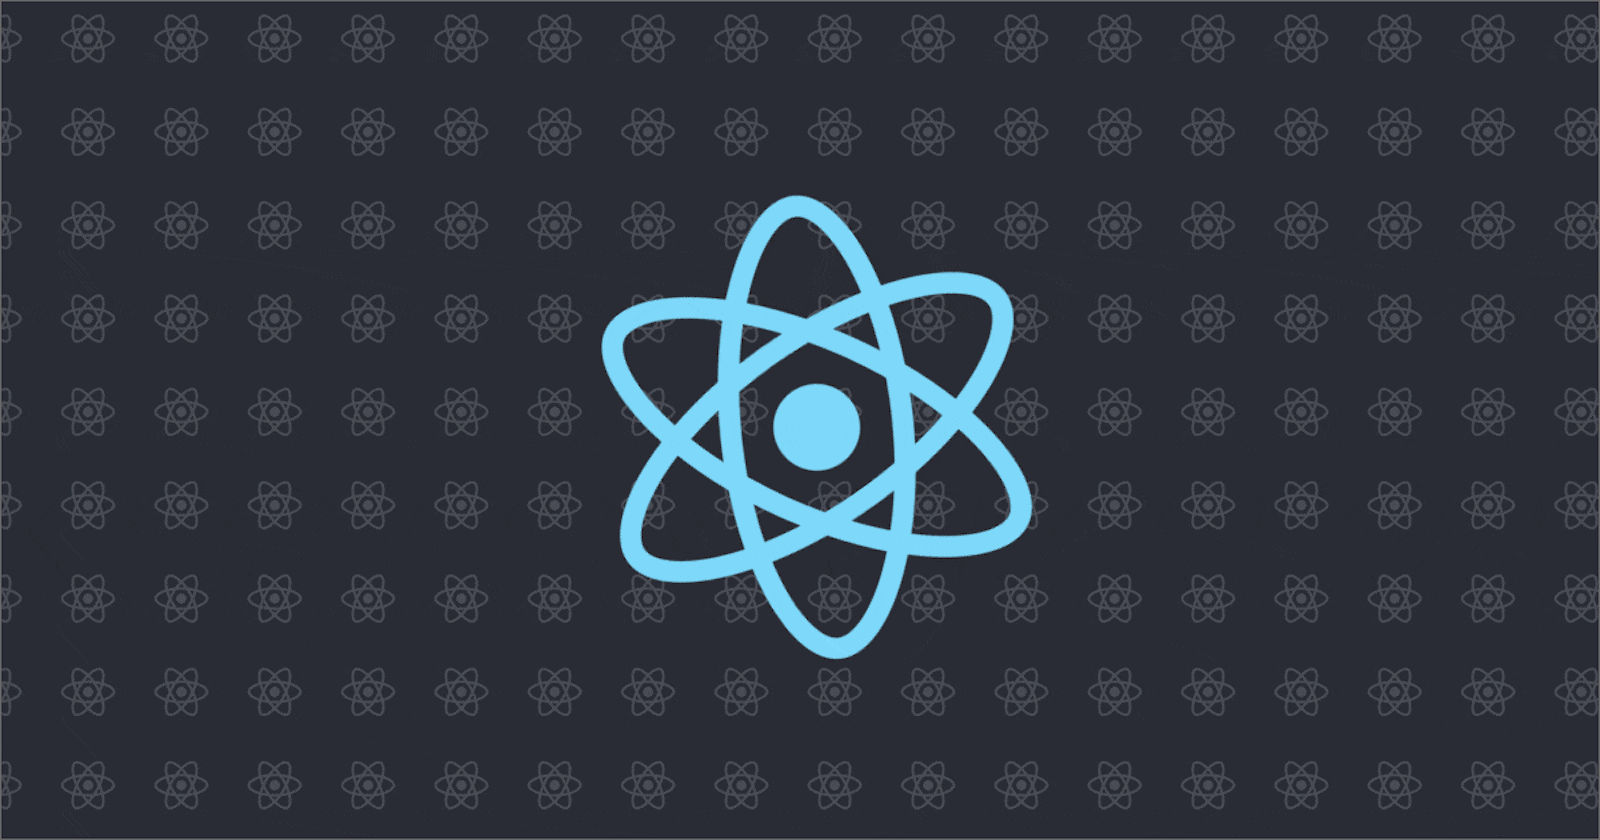 Learn React context by example